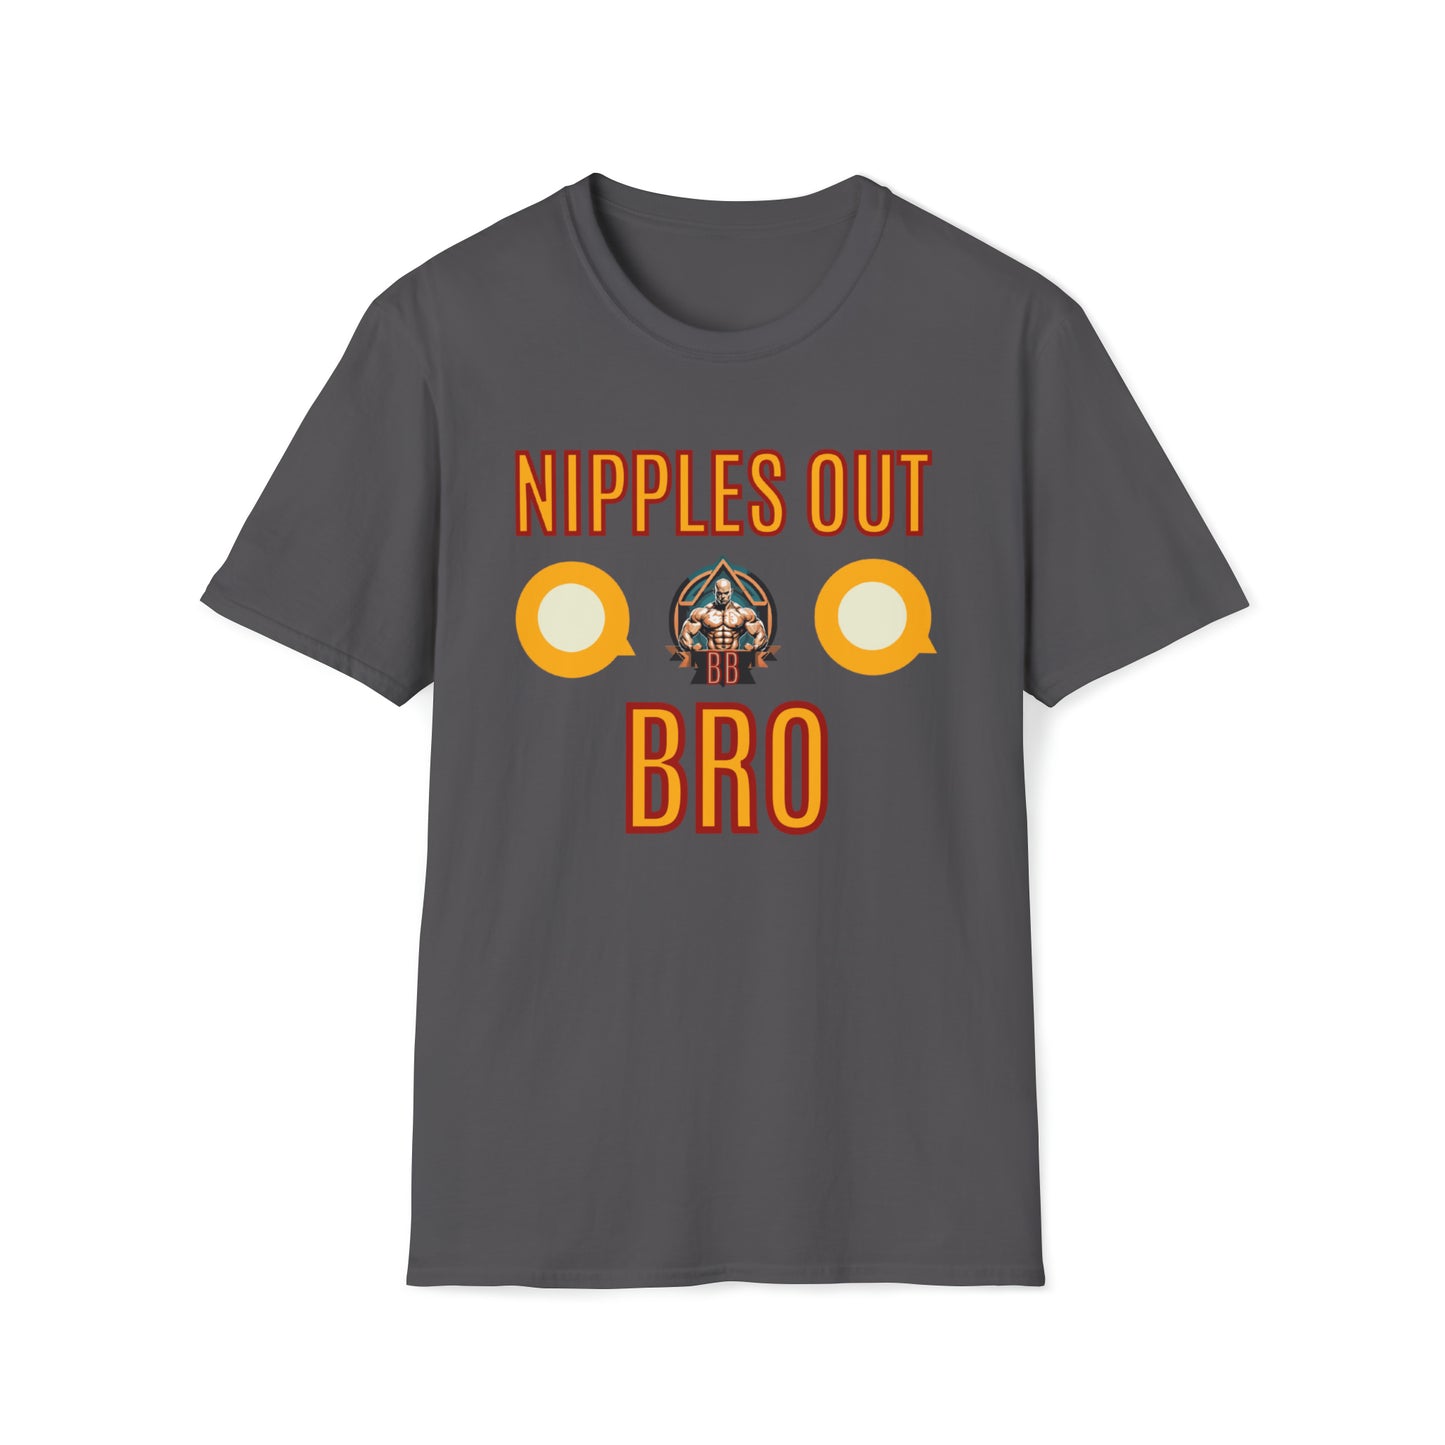 Unisex Nipples Out Bro #2 Softstyle T-Shirt, Humorous Graphic Tee, Gift for Gym Enthusiasts, Trendy Urban Streetwear, Casual Comfortable Top, Fun Graphic T-shirt, Trendy Shirt